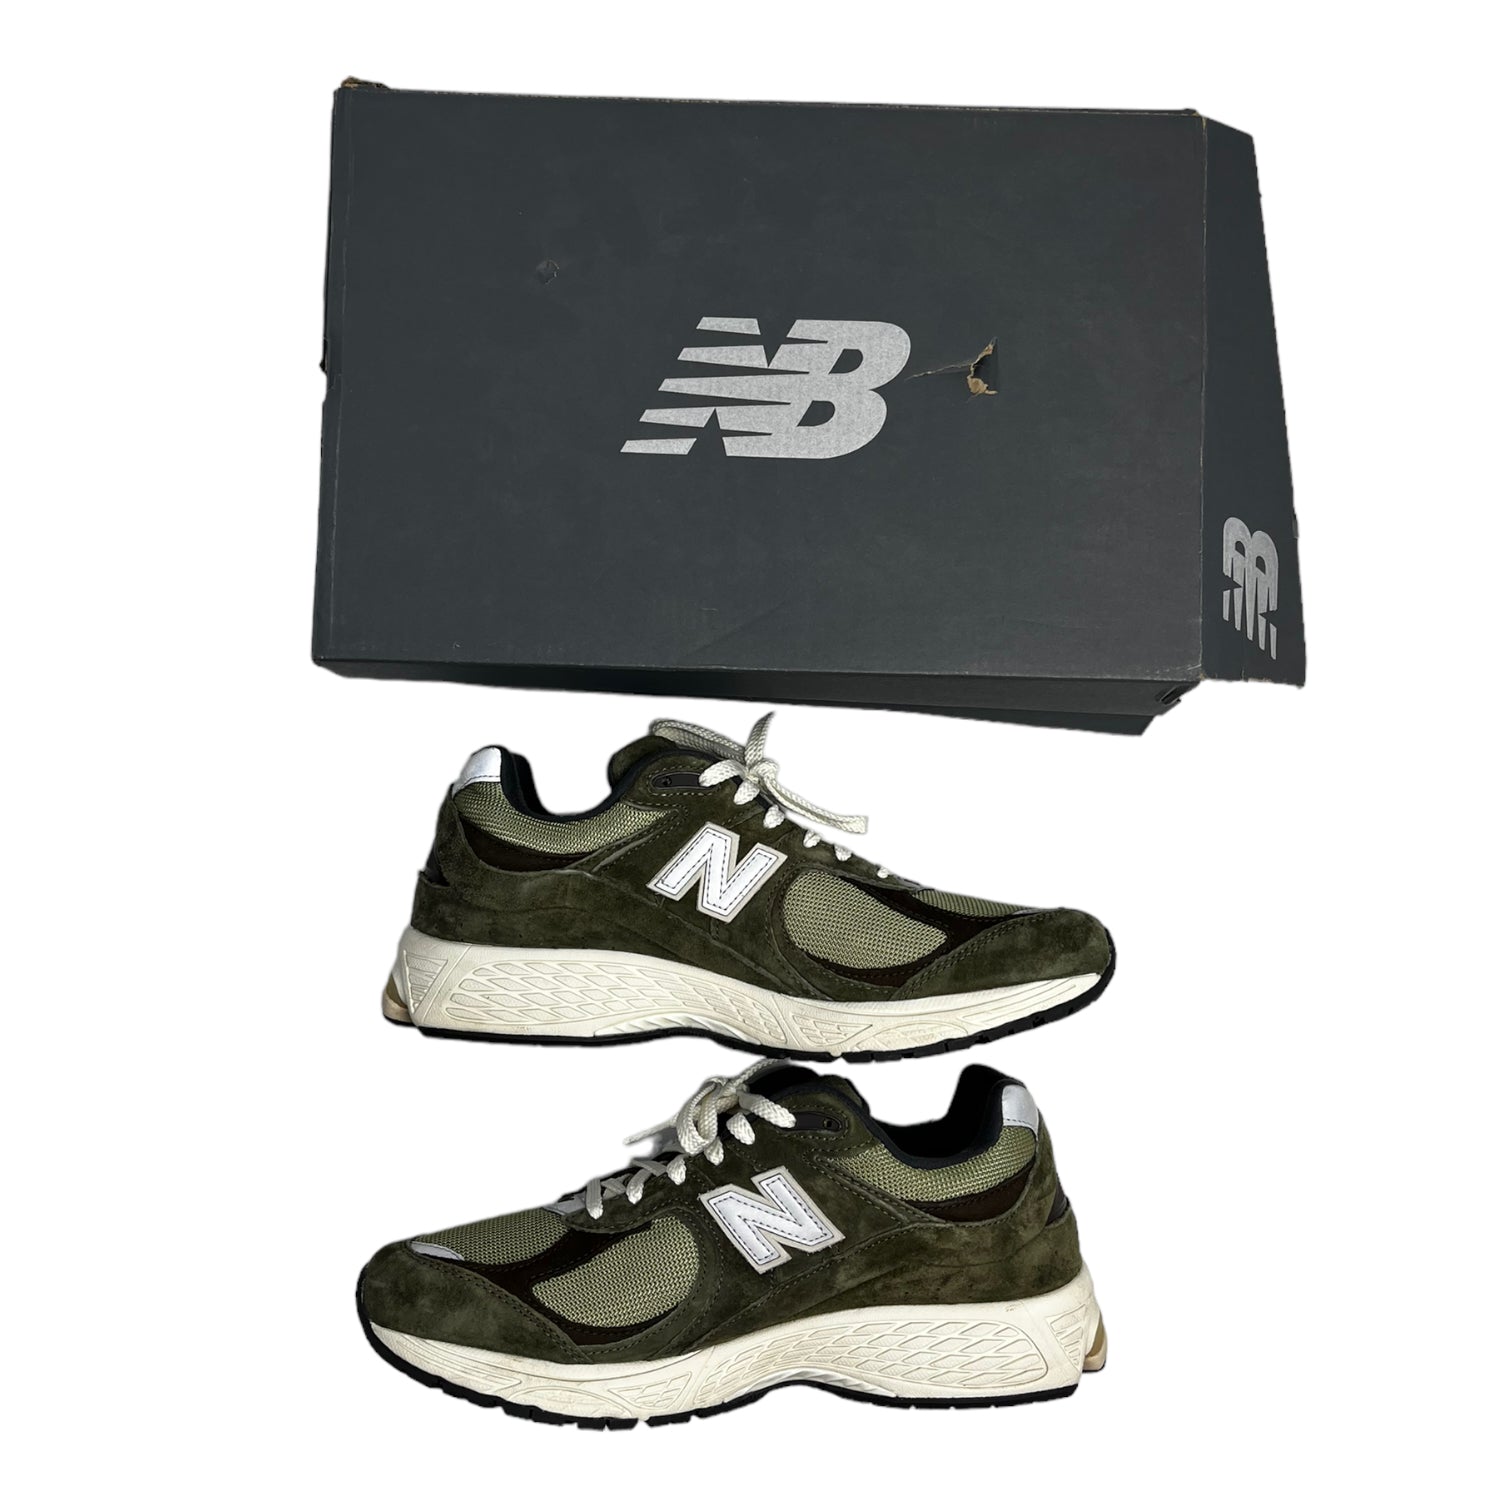 New balance 2002R Olive Brown (Used)